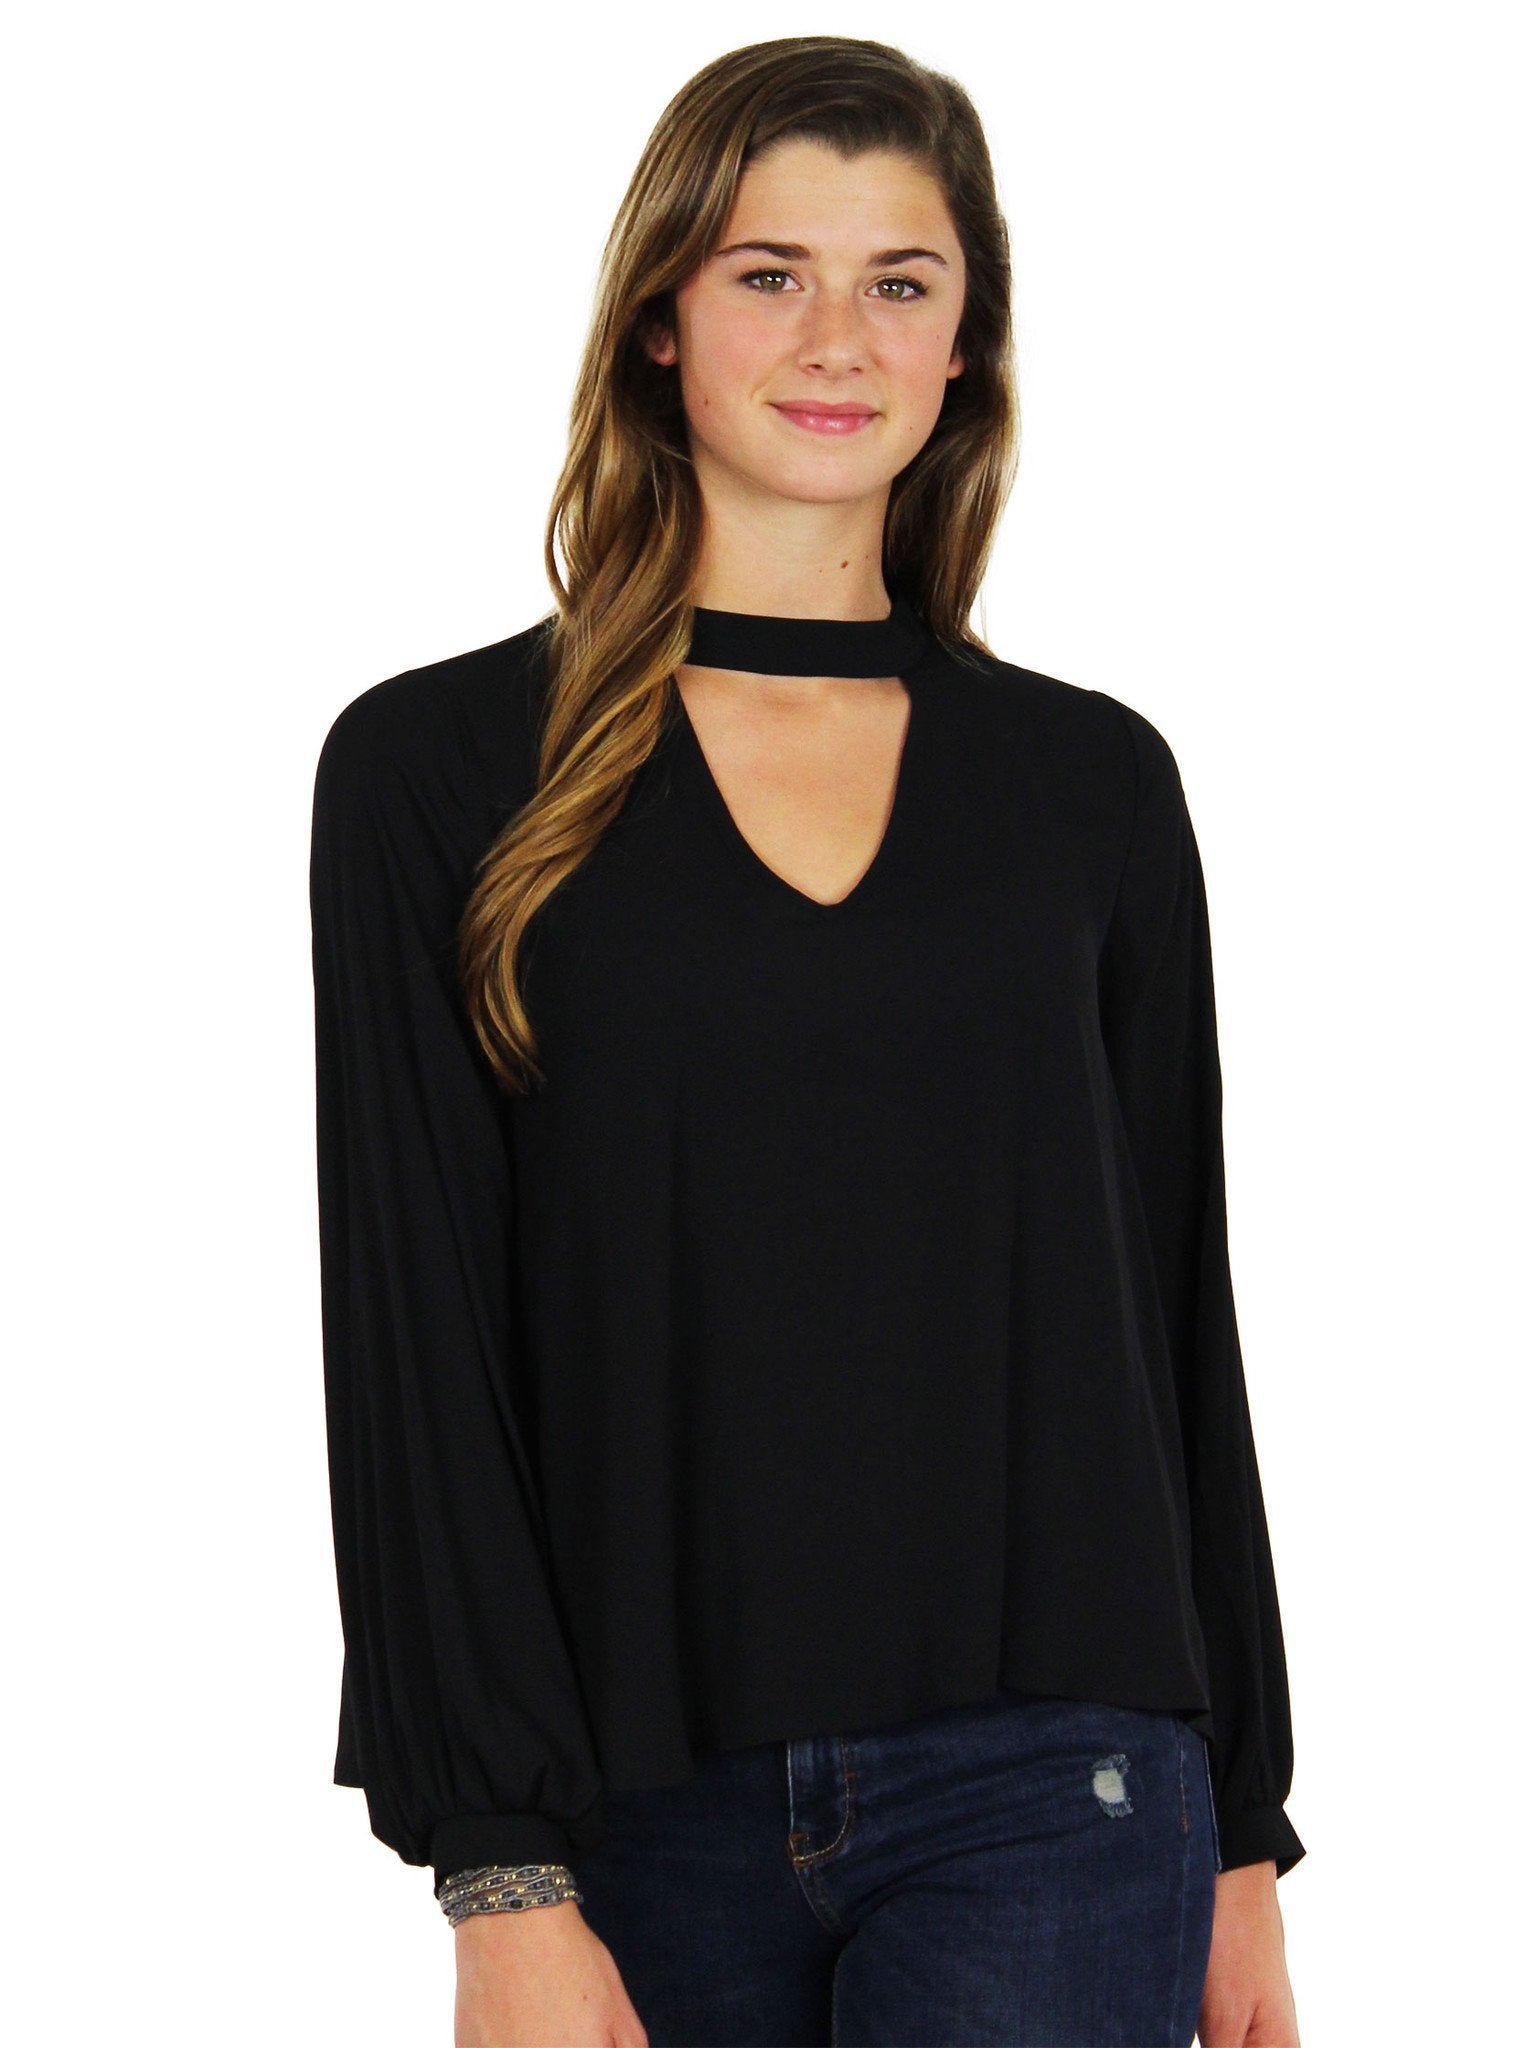 Woman wearing a top rental from Lush called Cut Out Long Sleeve Blouse